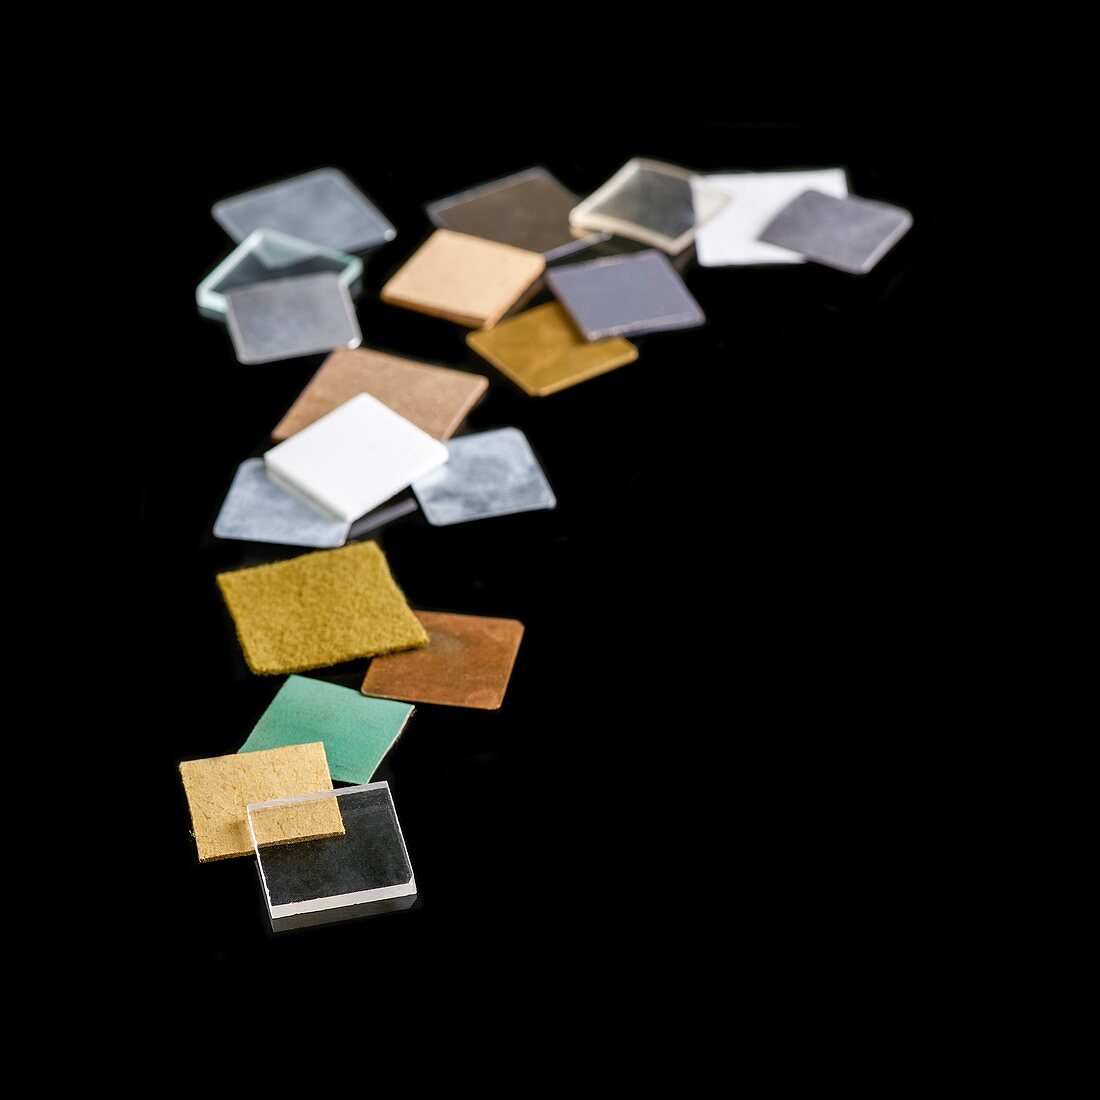 Squares of everyday materials